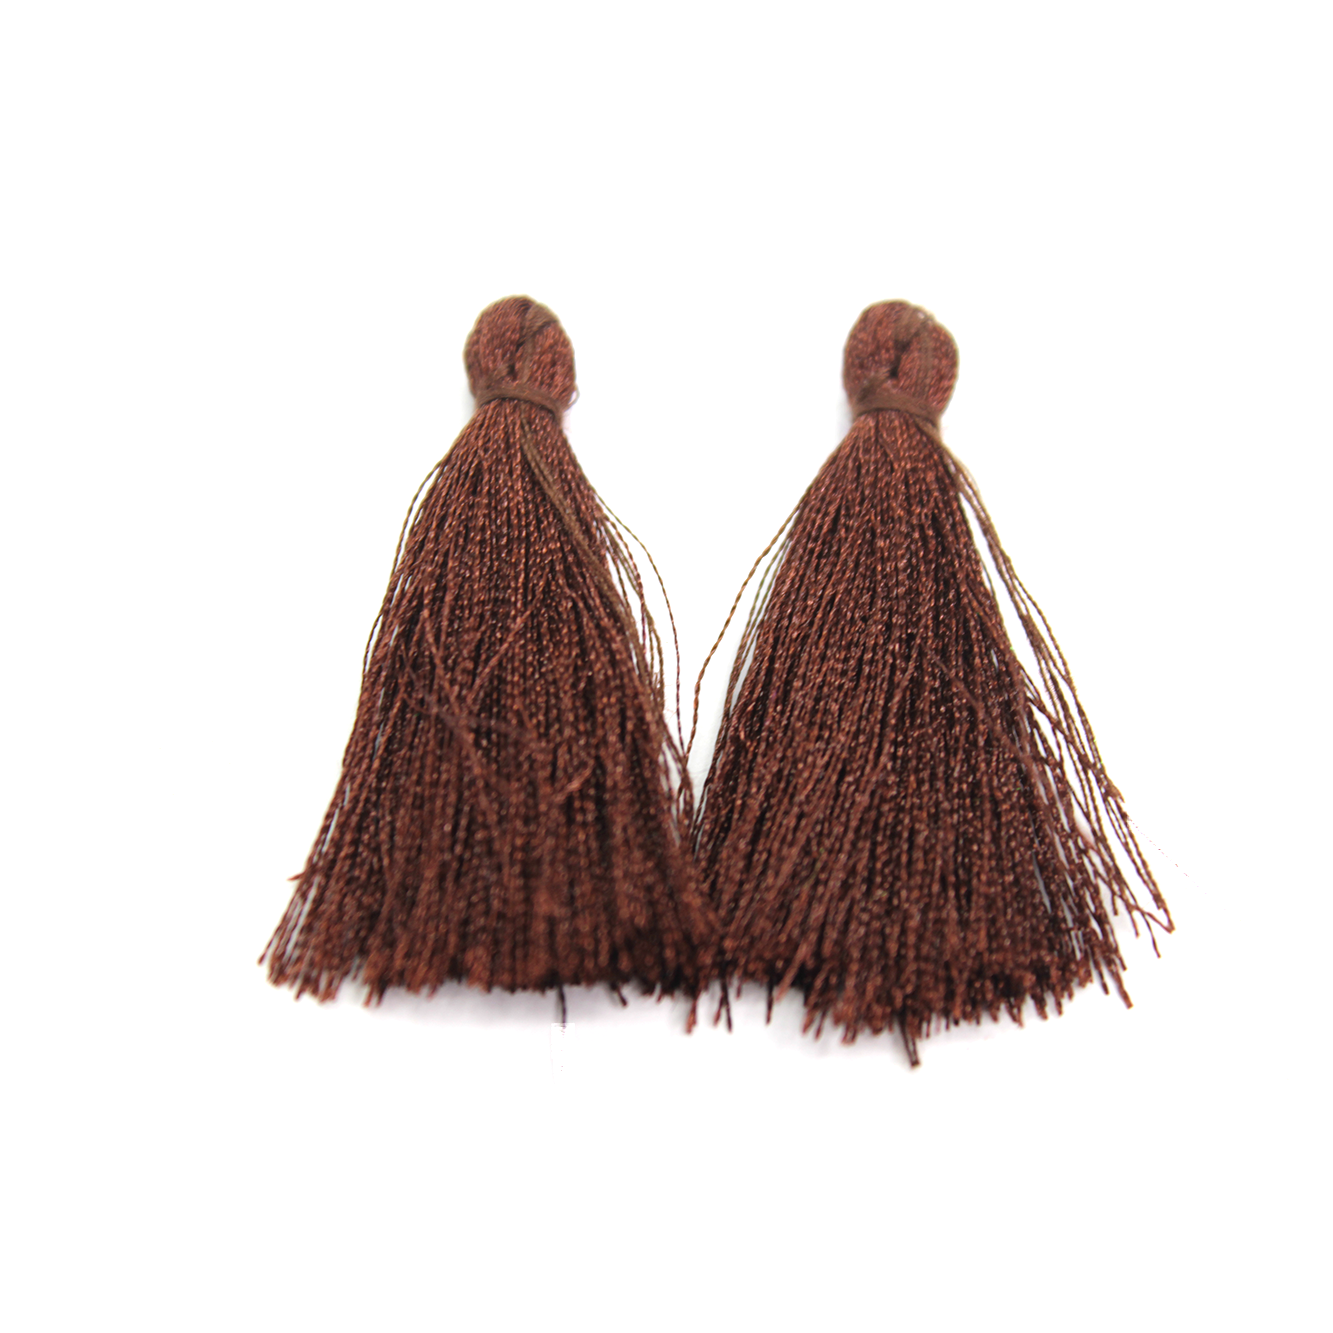 Tassels, Silk Thread, 2 inch, 5pcs, Available in 9 colors